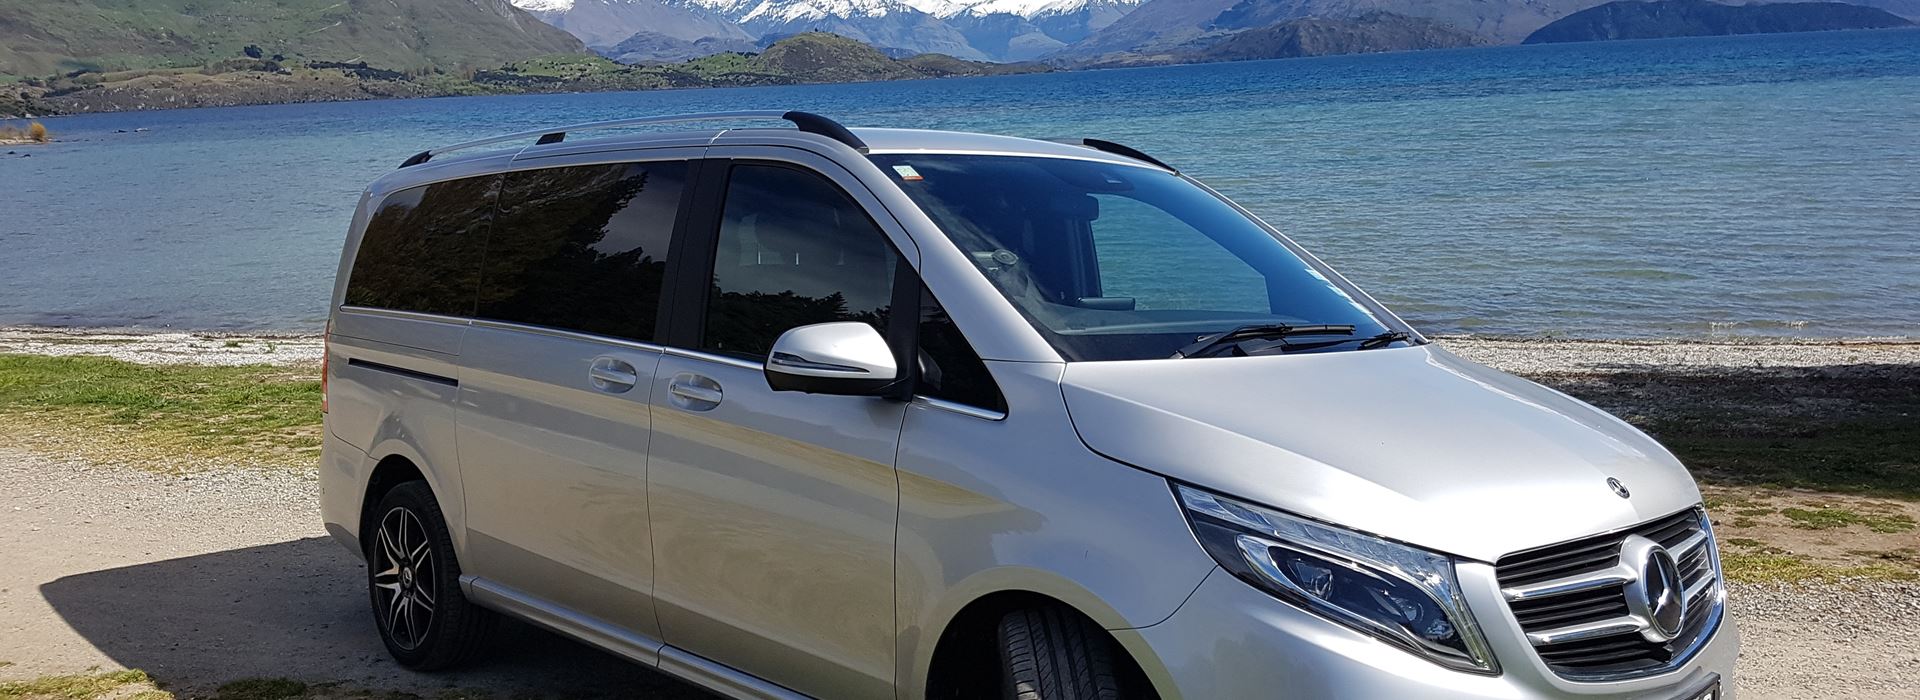 Executive Chauffeured Tours & Transfers in New Zealand